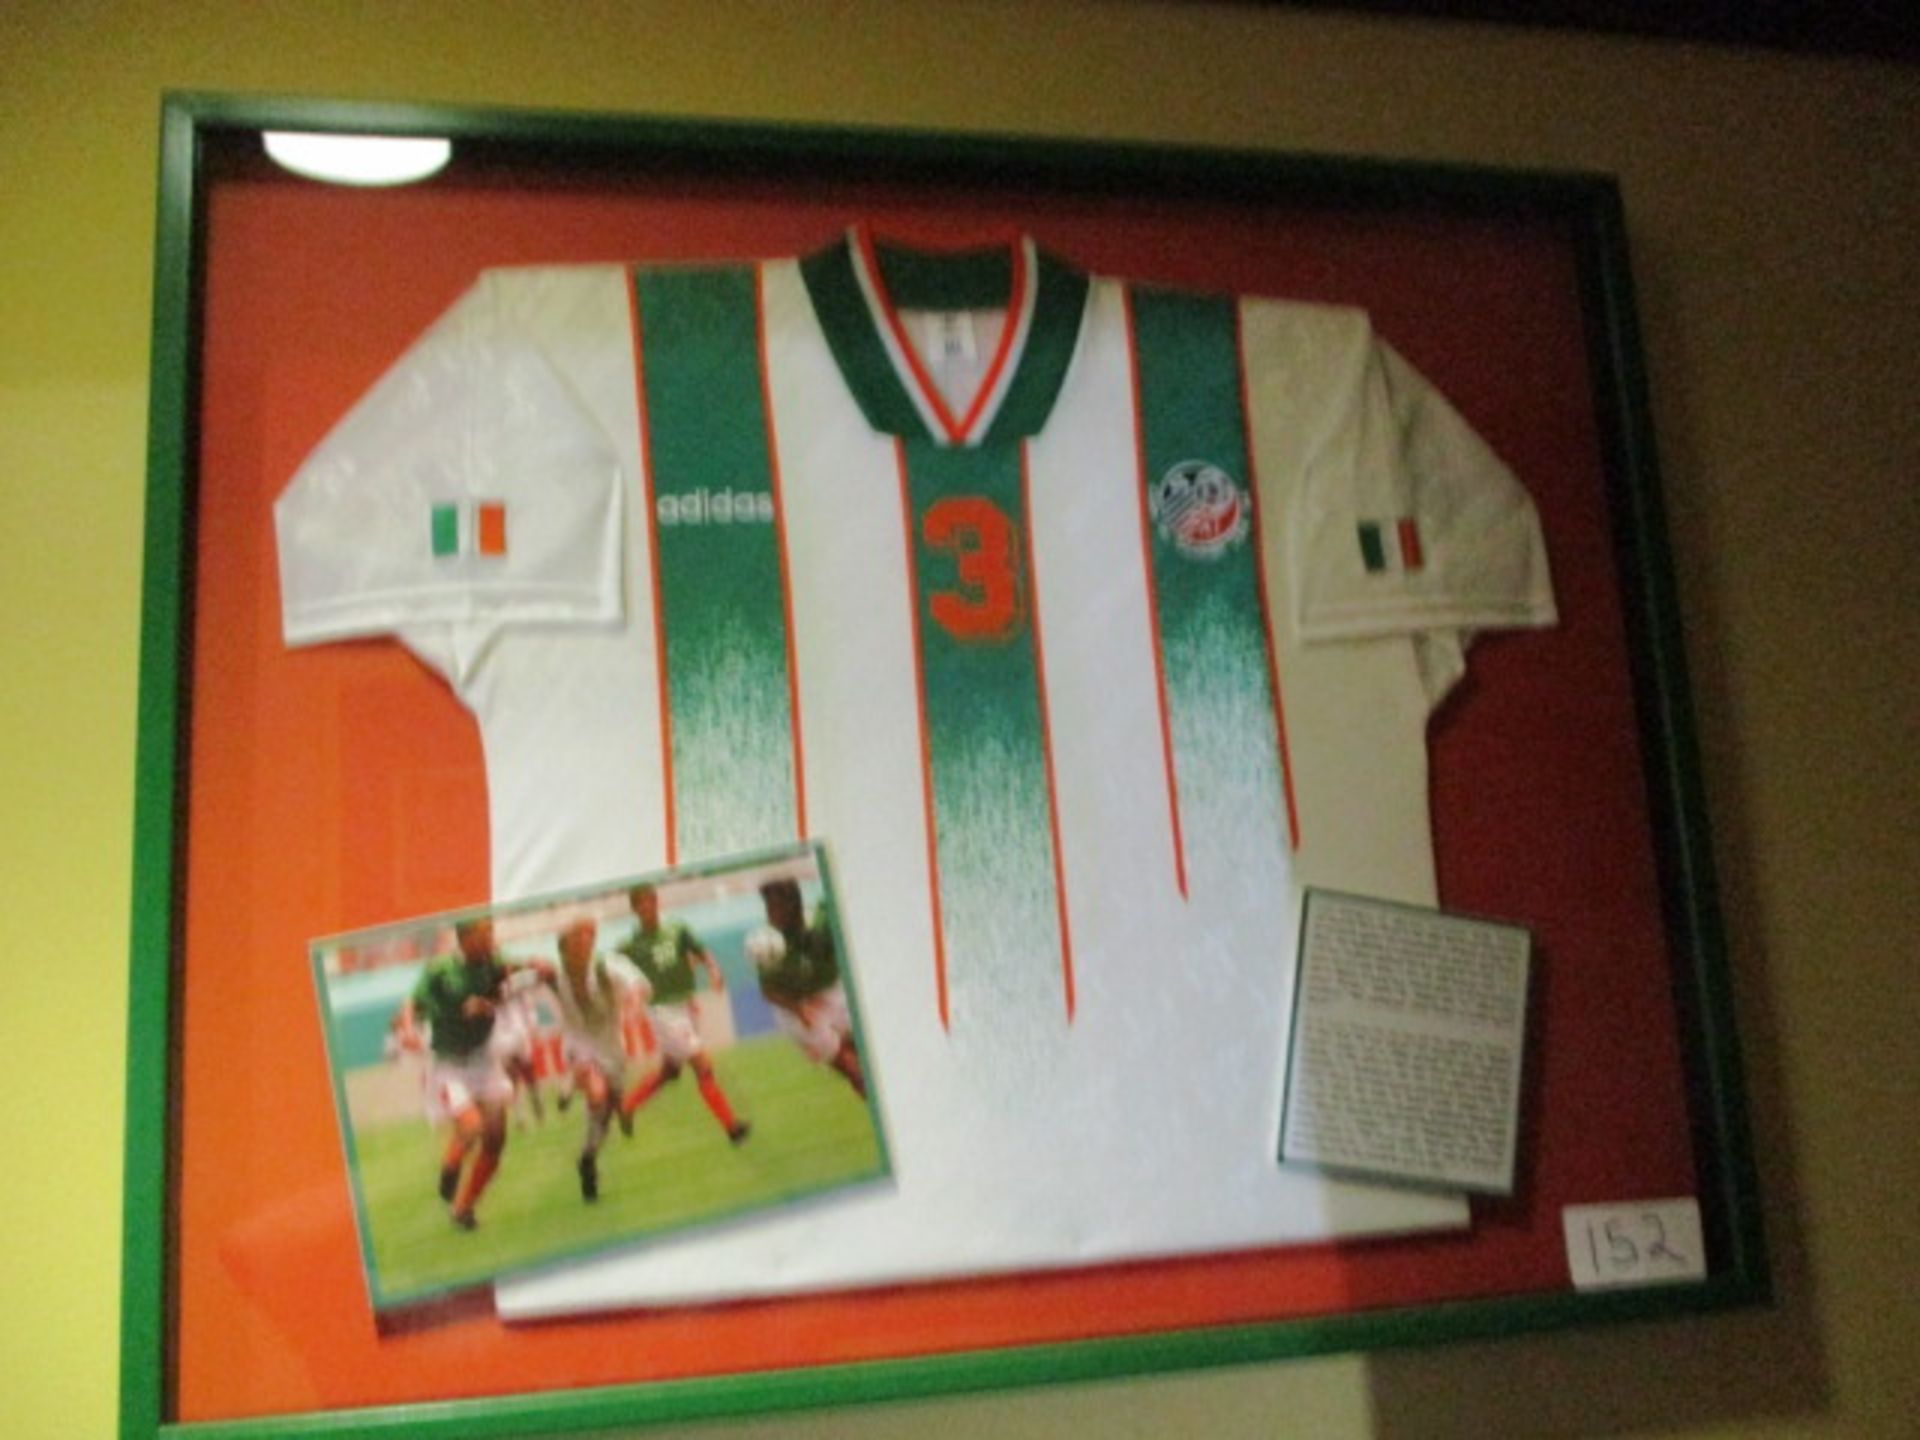 Republic of Ireland National Team 1994 World Cup jersey No. 3 worn by Terry Phelan versus - Image 2 of 3